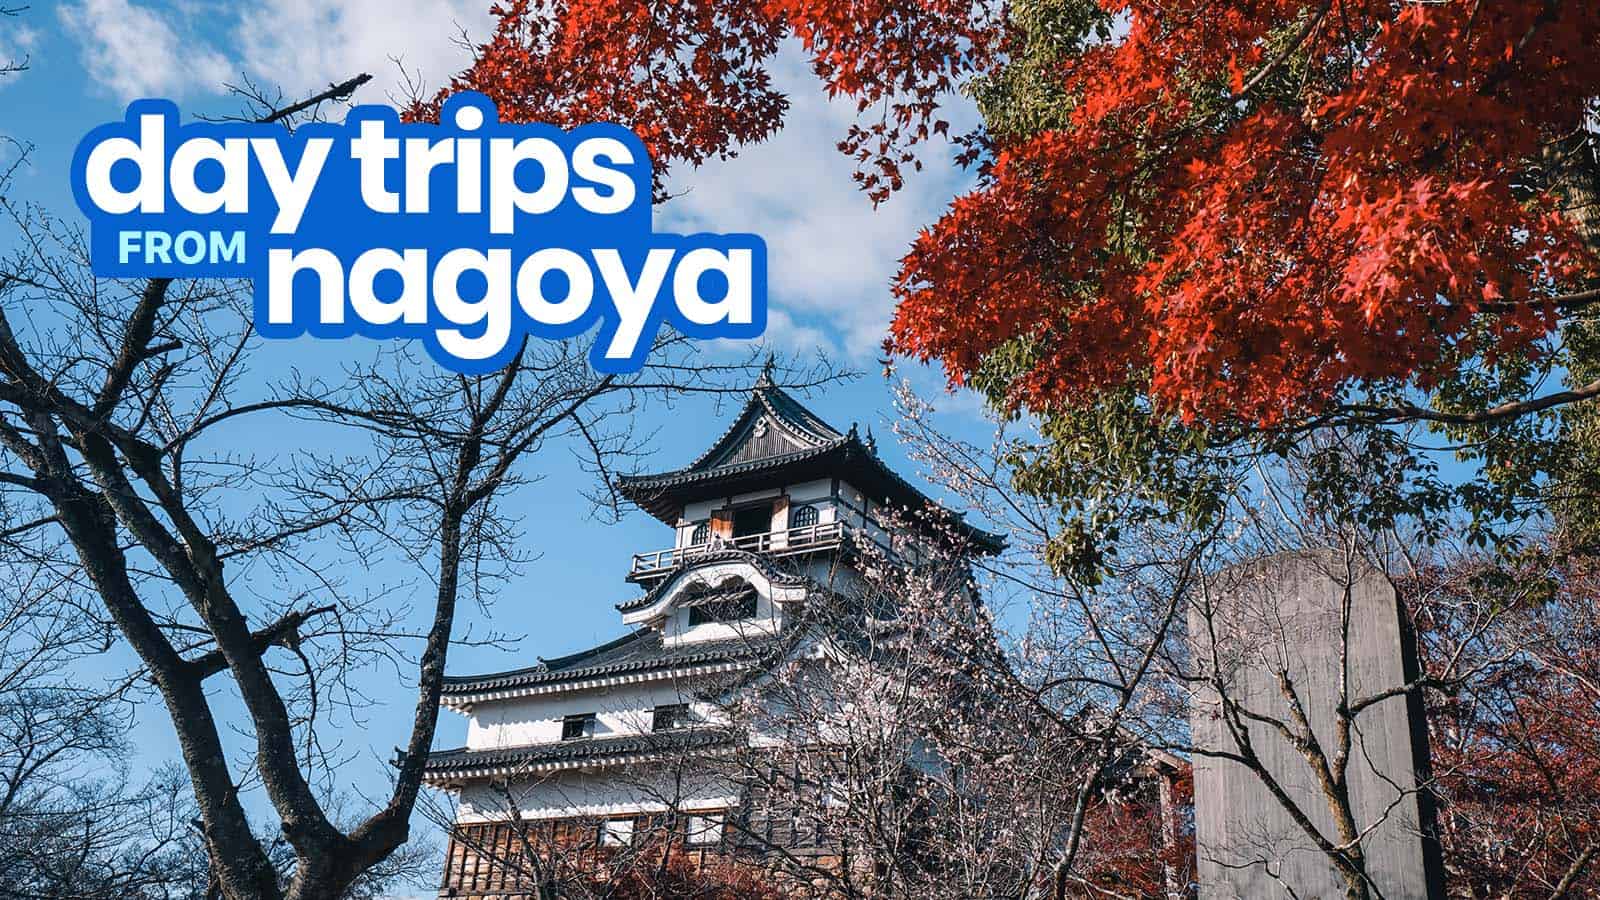 8 Awesome DAY TRIPS FROM NAGOYA